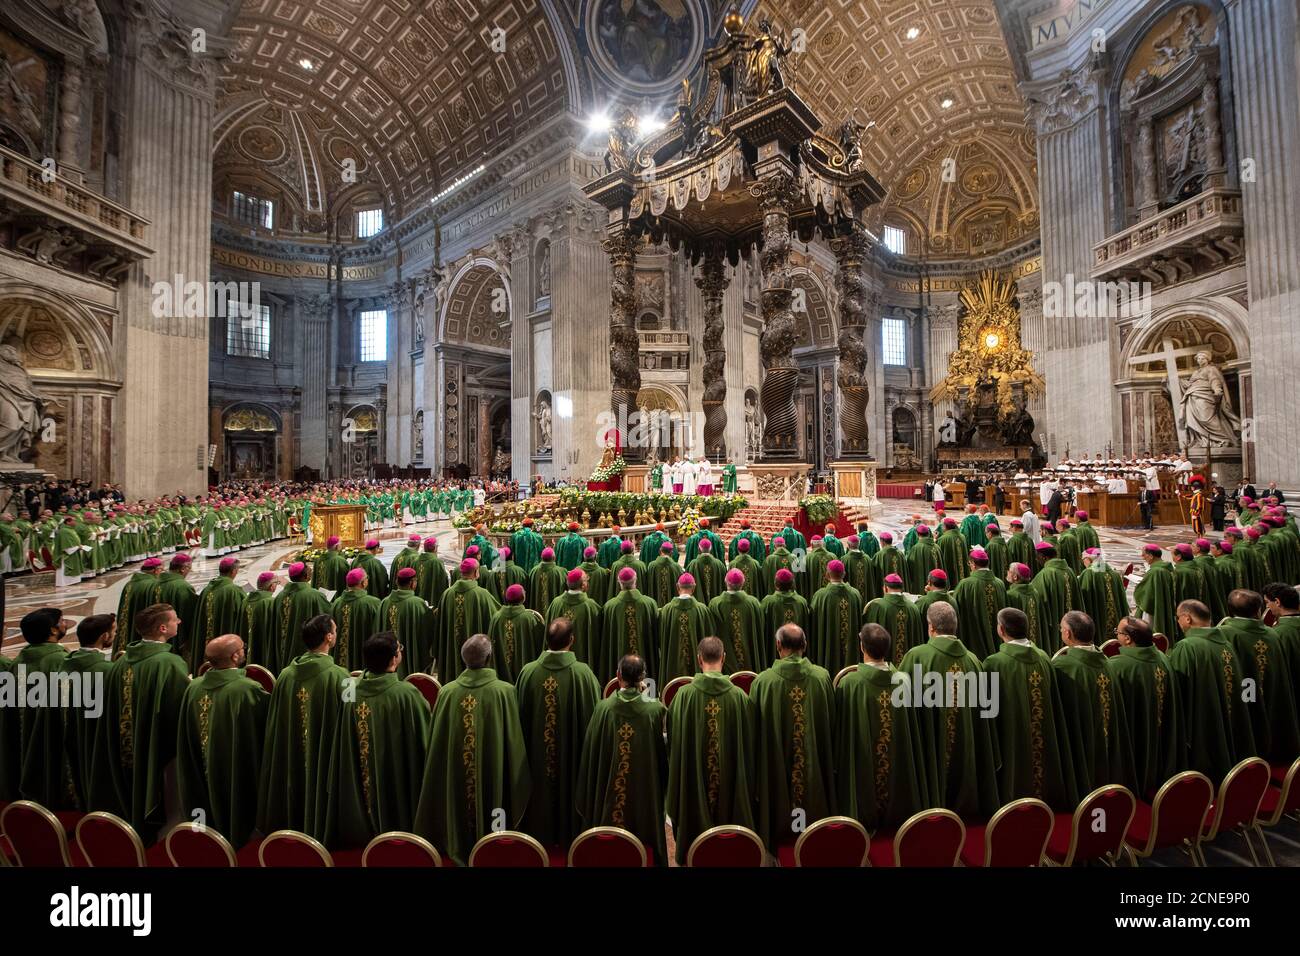 Pope Francis celebrates the closing Mass of the Synod on Amazonia in Saint Peter's Basilica, Vatican, Rome, Lazio, Italy, Europe Stock Photo